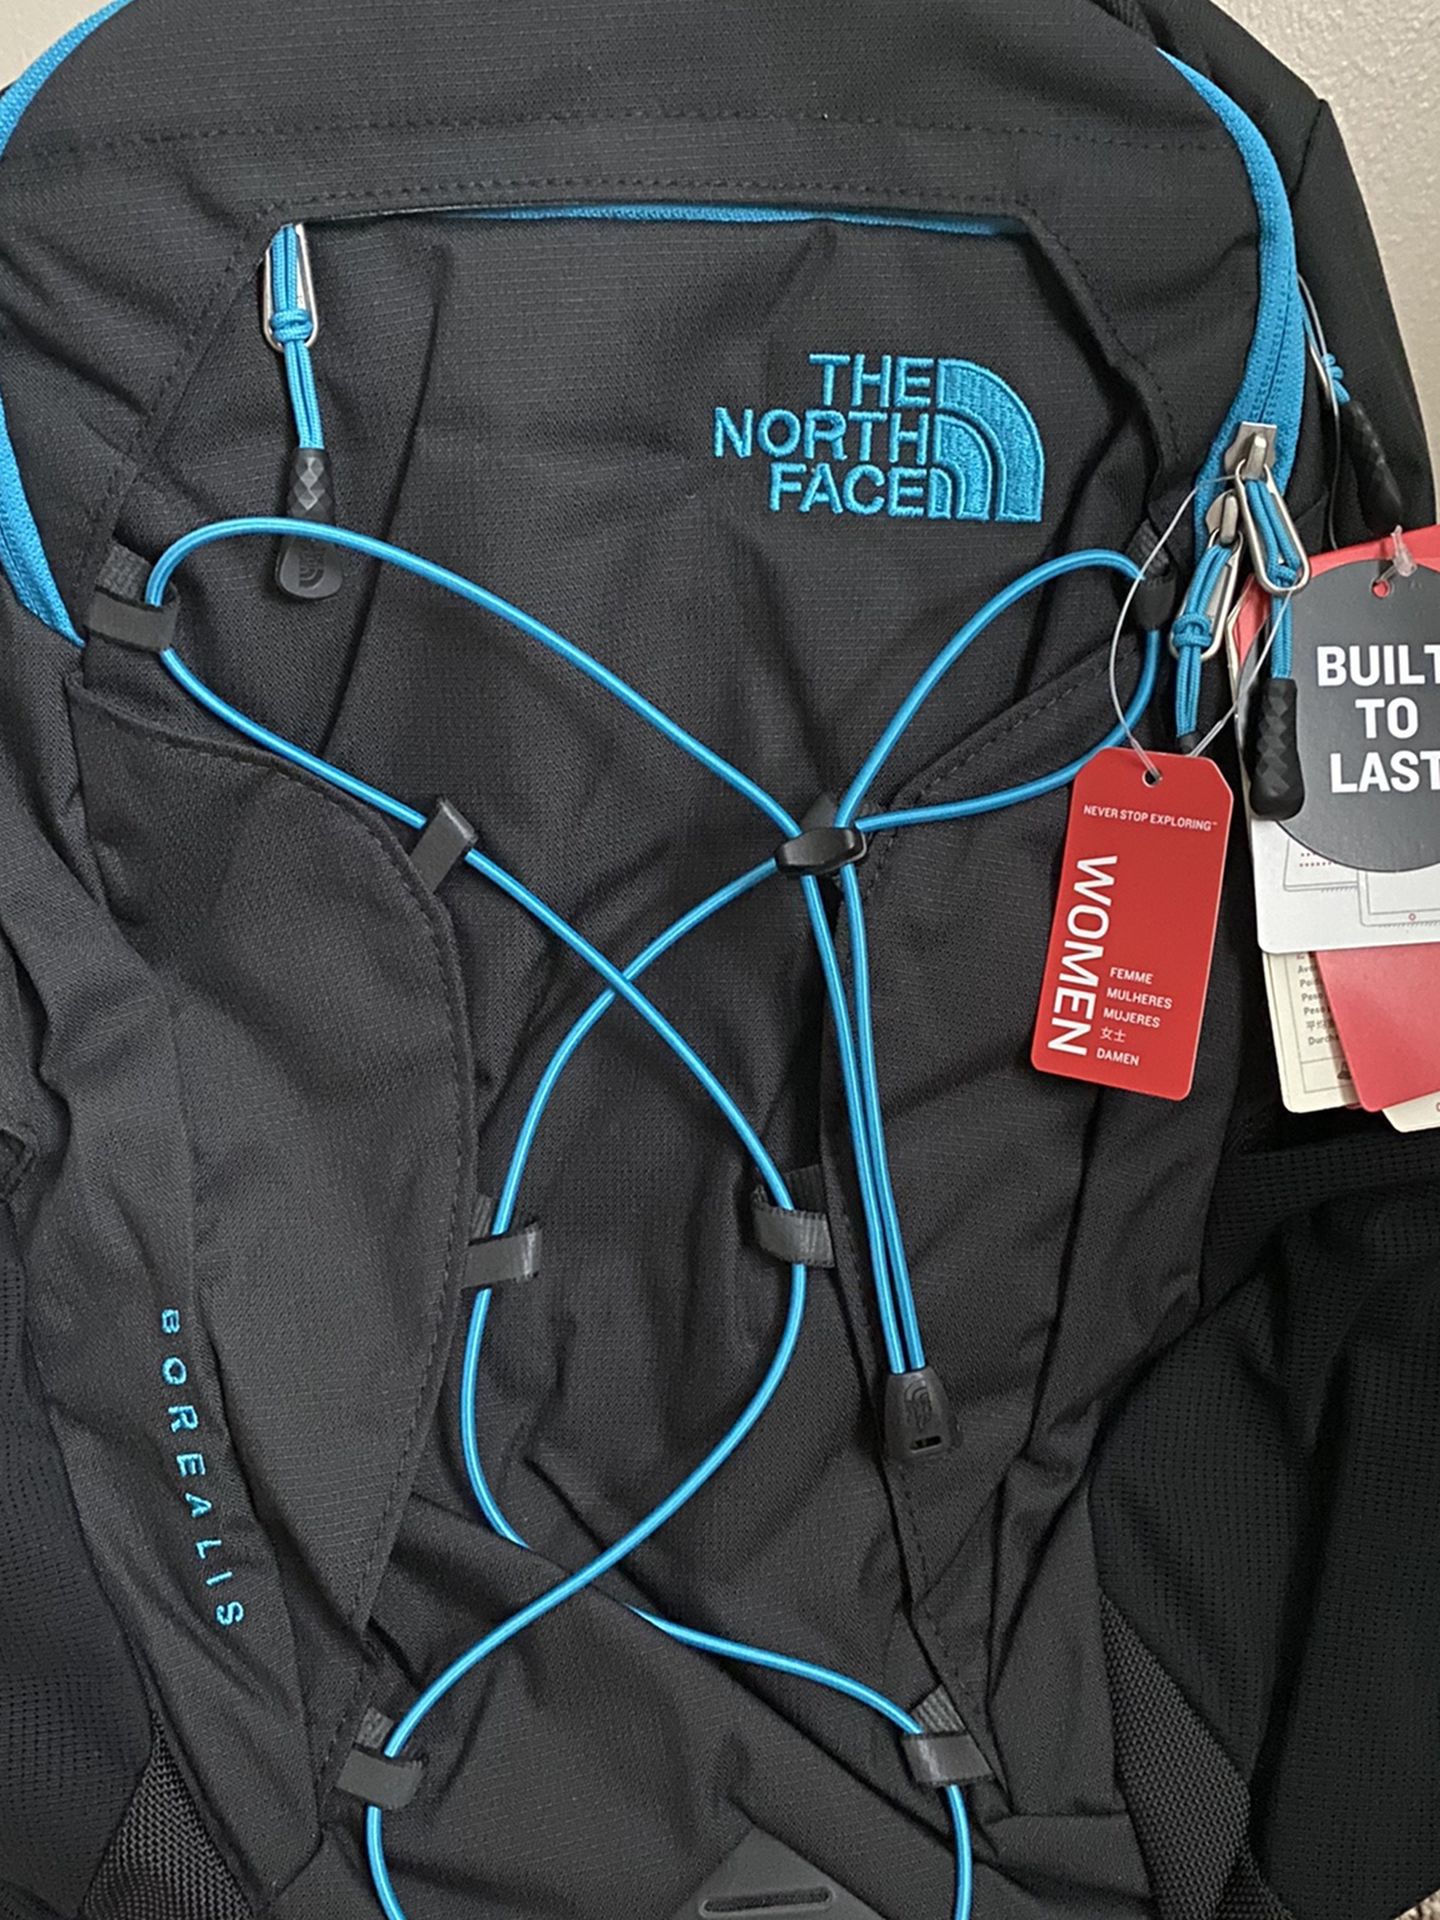 The North Face Borealis Backpack Black/Teal